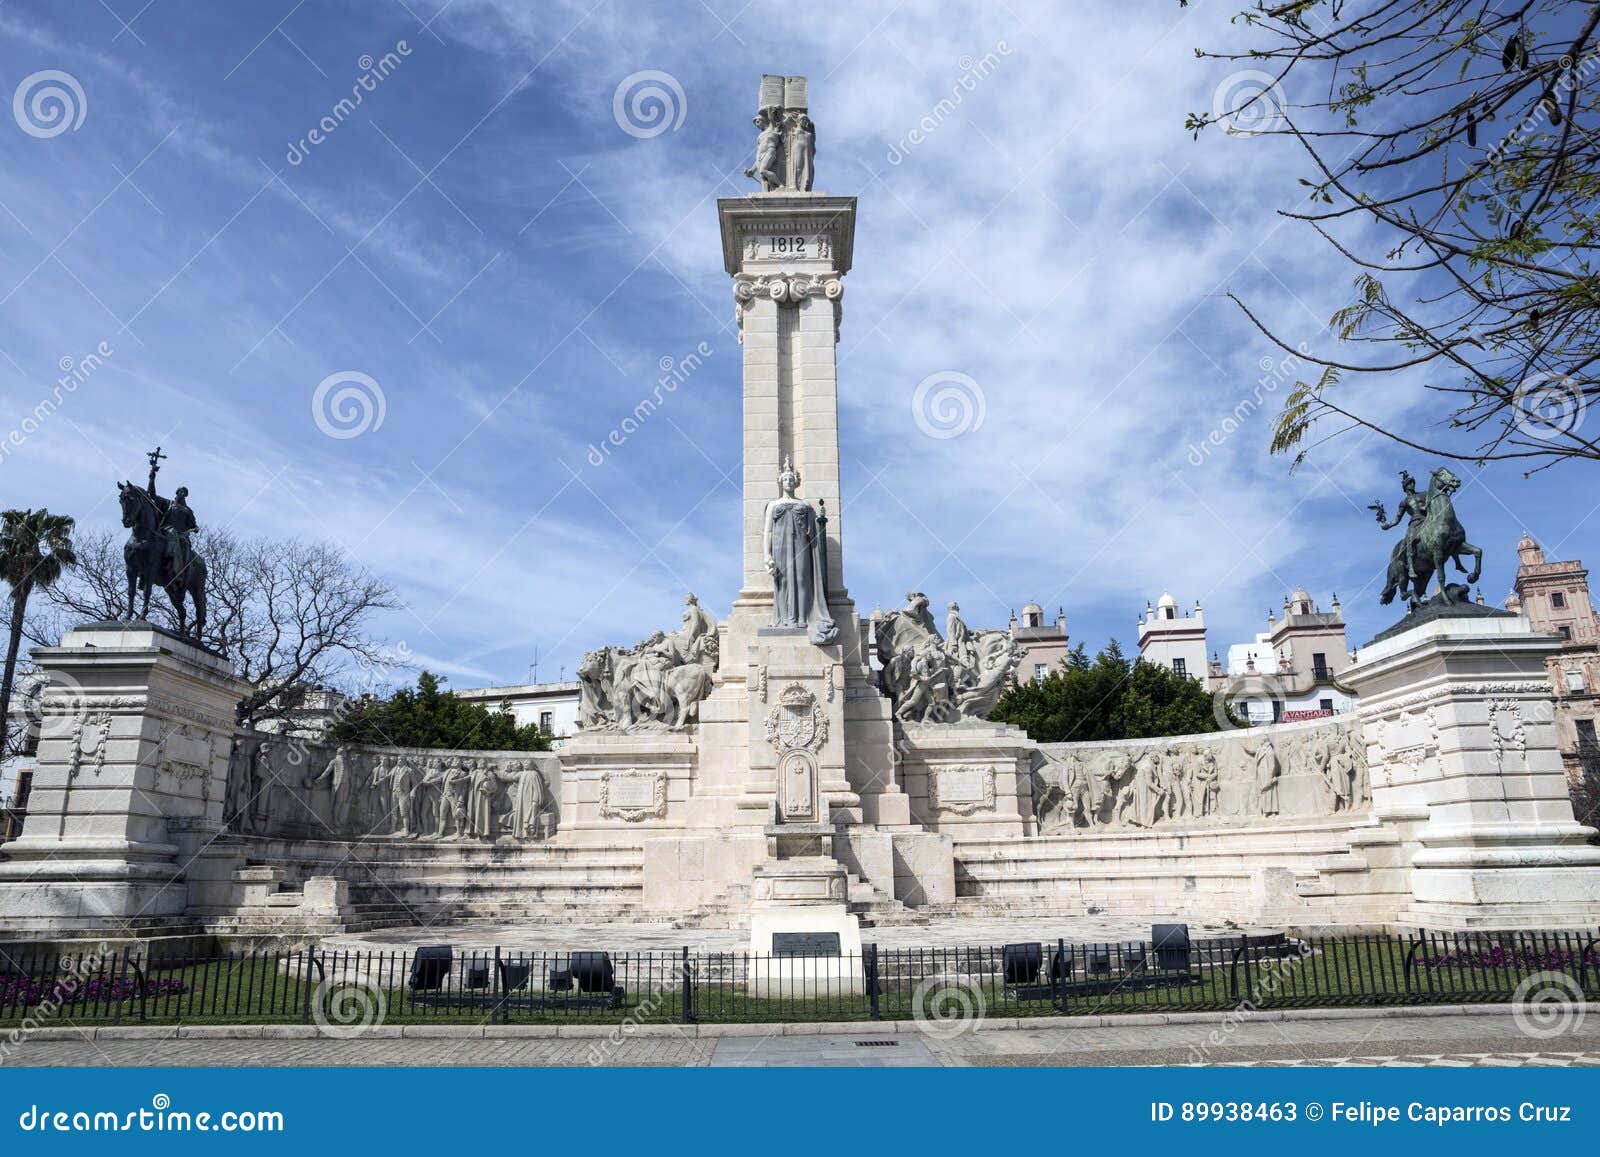 Monument To the Constitution of 1812, Panoramic View, Cadiz, and ...